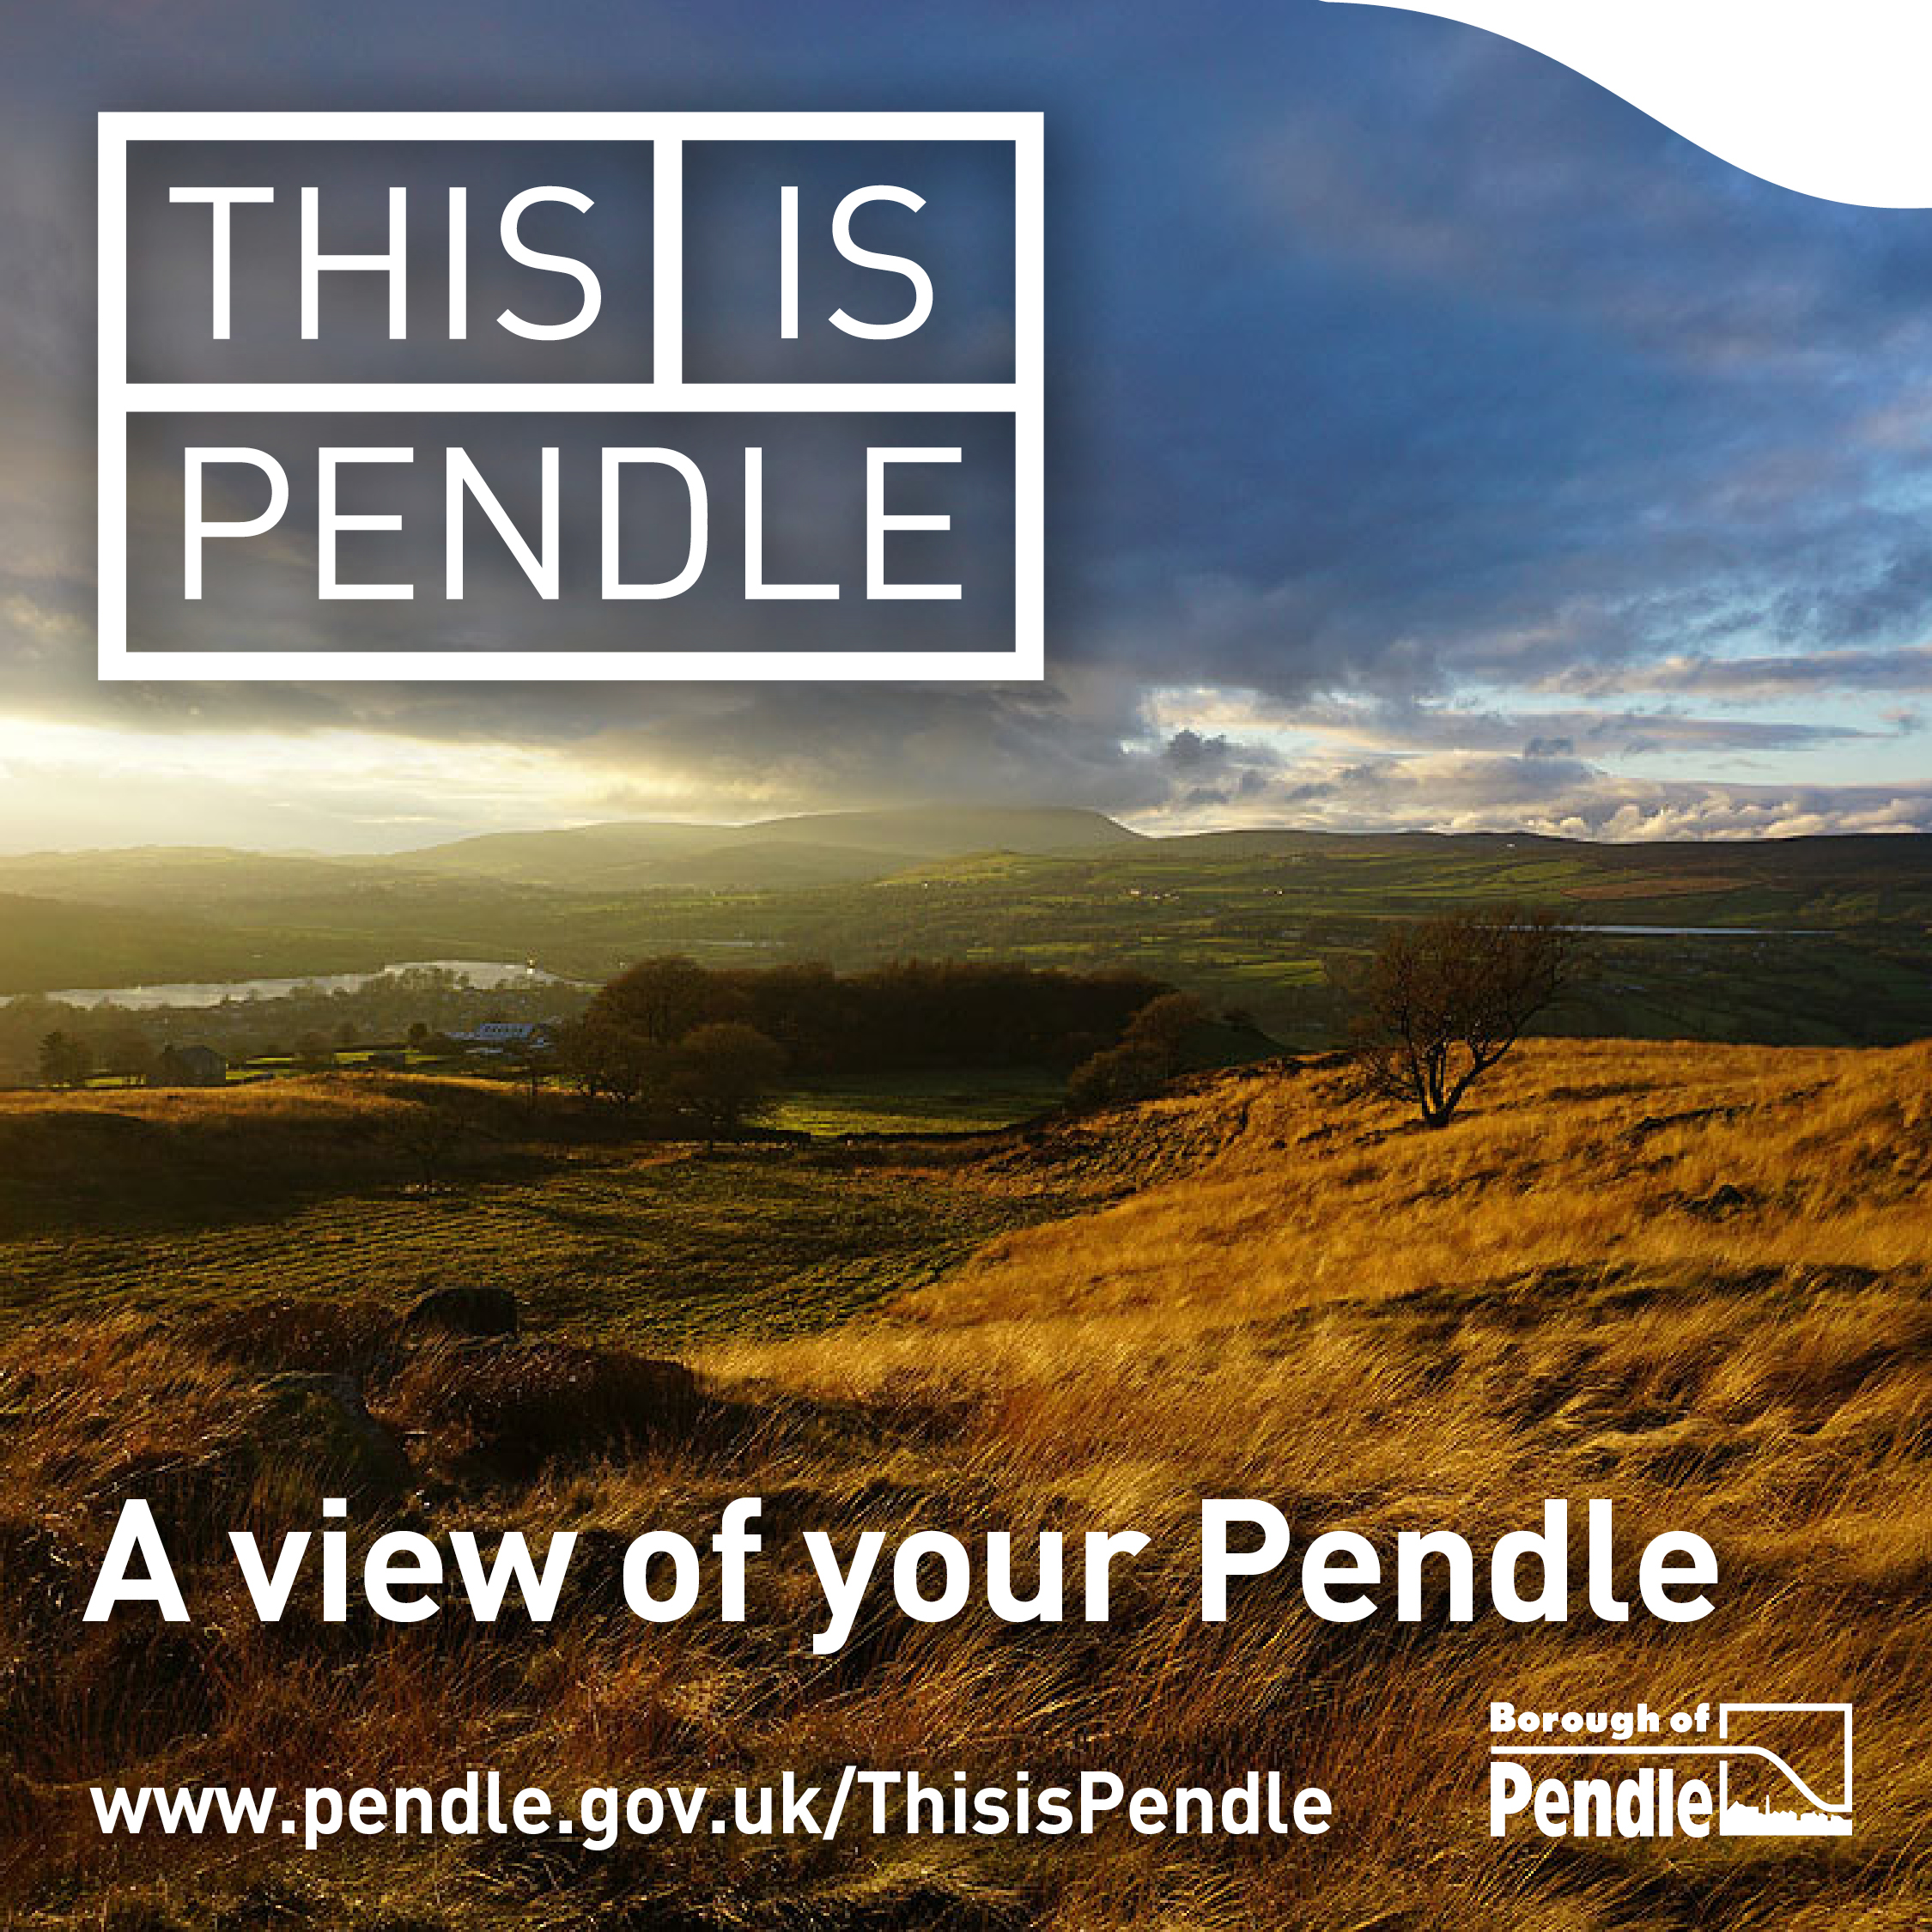 Final chance to complete survey and help shape Pendle’s future